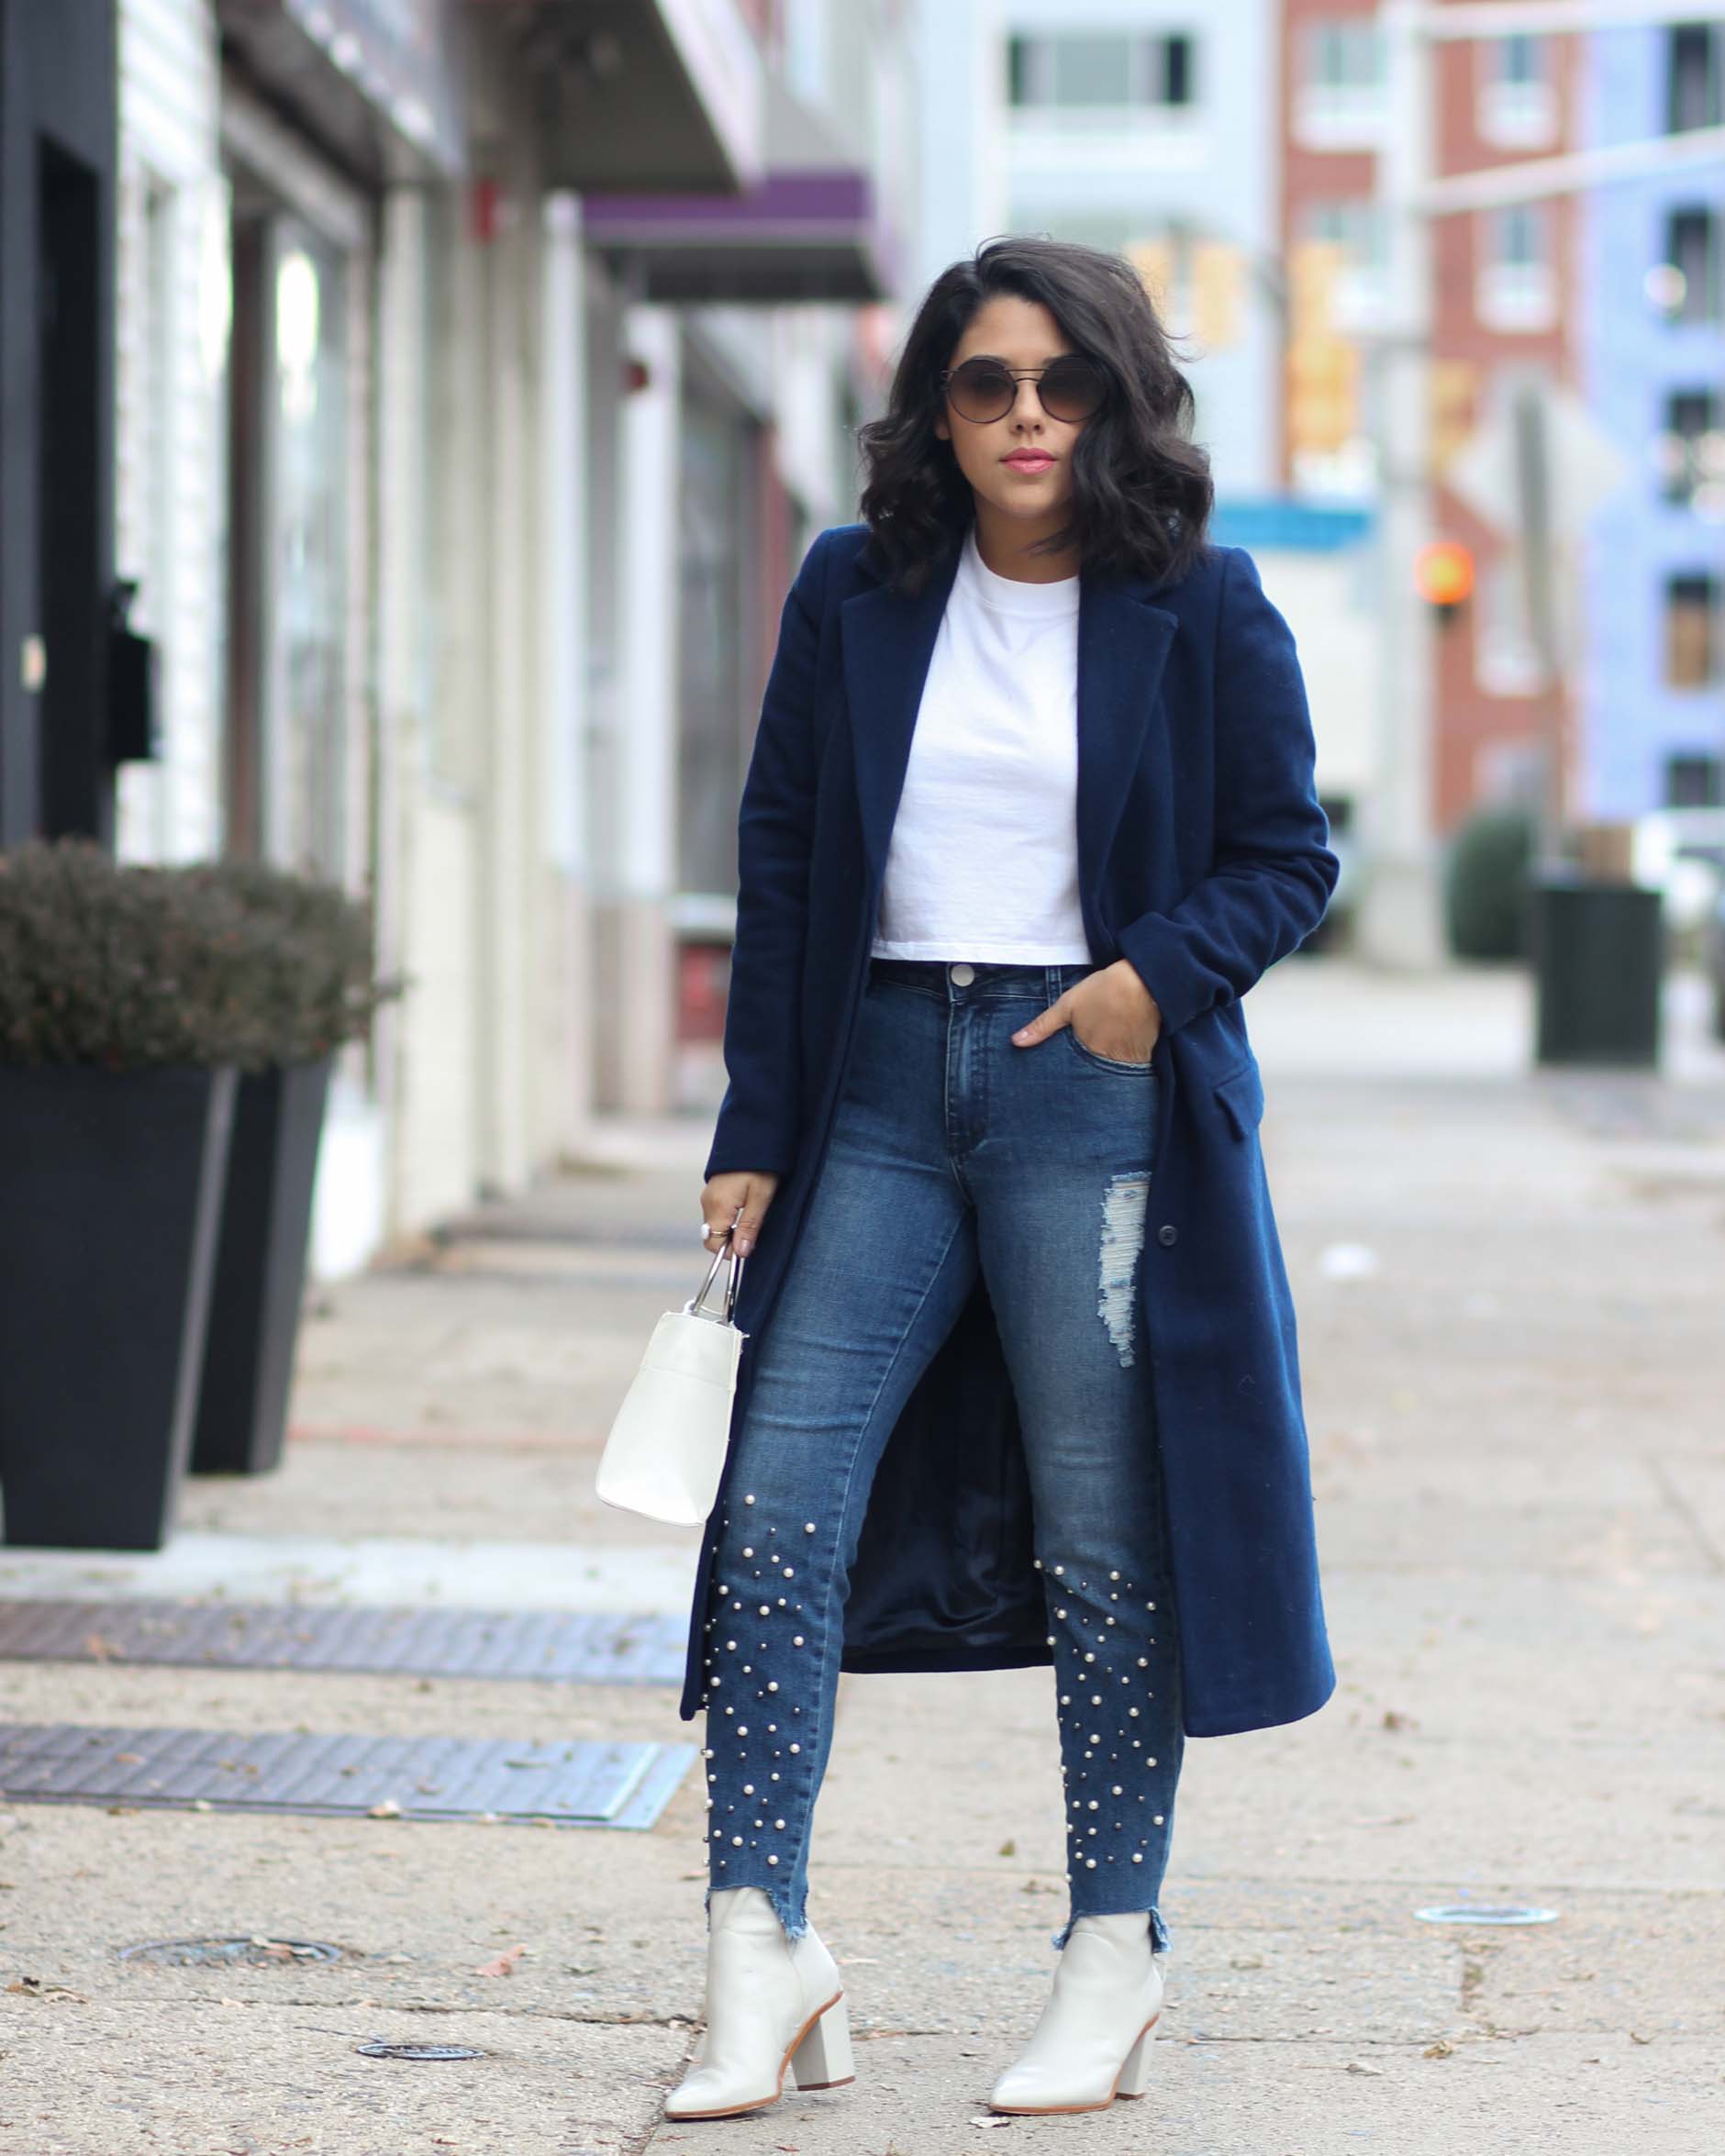 lifestyle blogger naty michele wearing pearl jeans and a navy coat